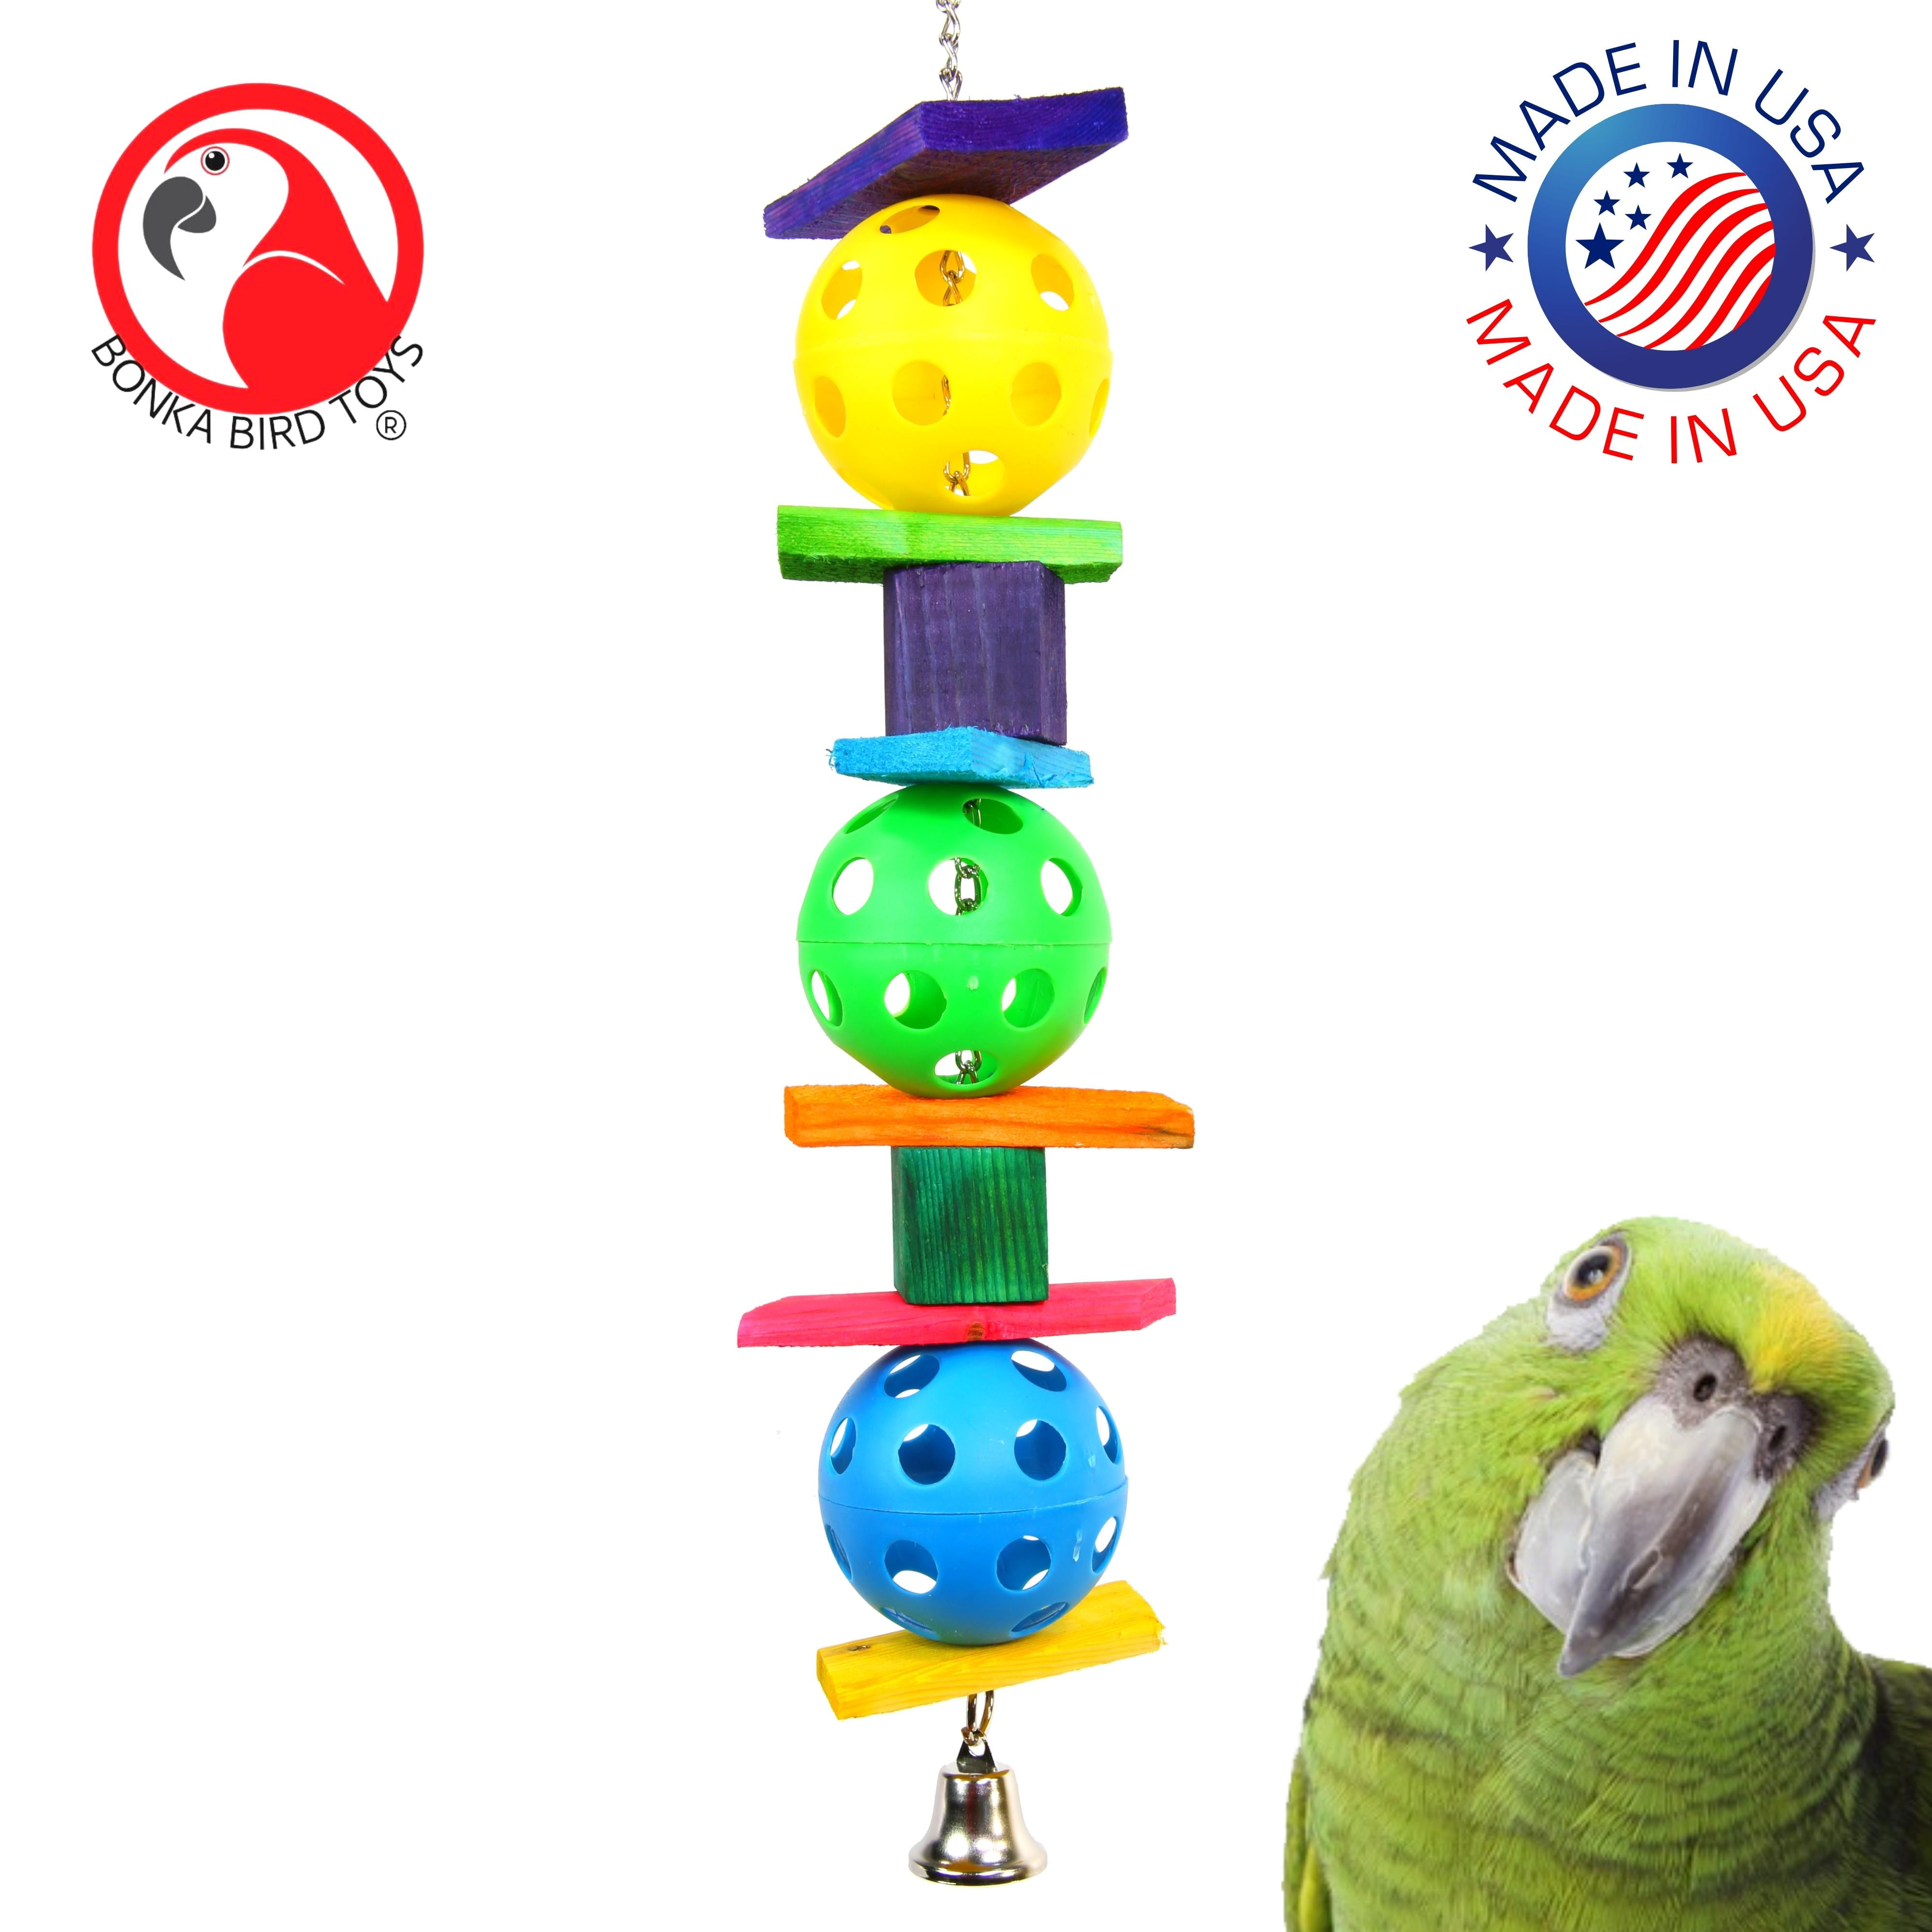 00030 Small Rattle Foot Talon Toy Parrot Birds Toys Craft Part Chewy Play 